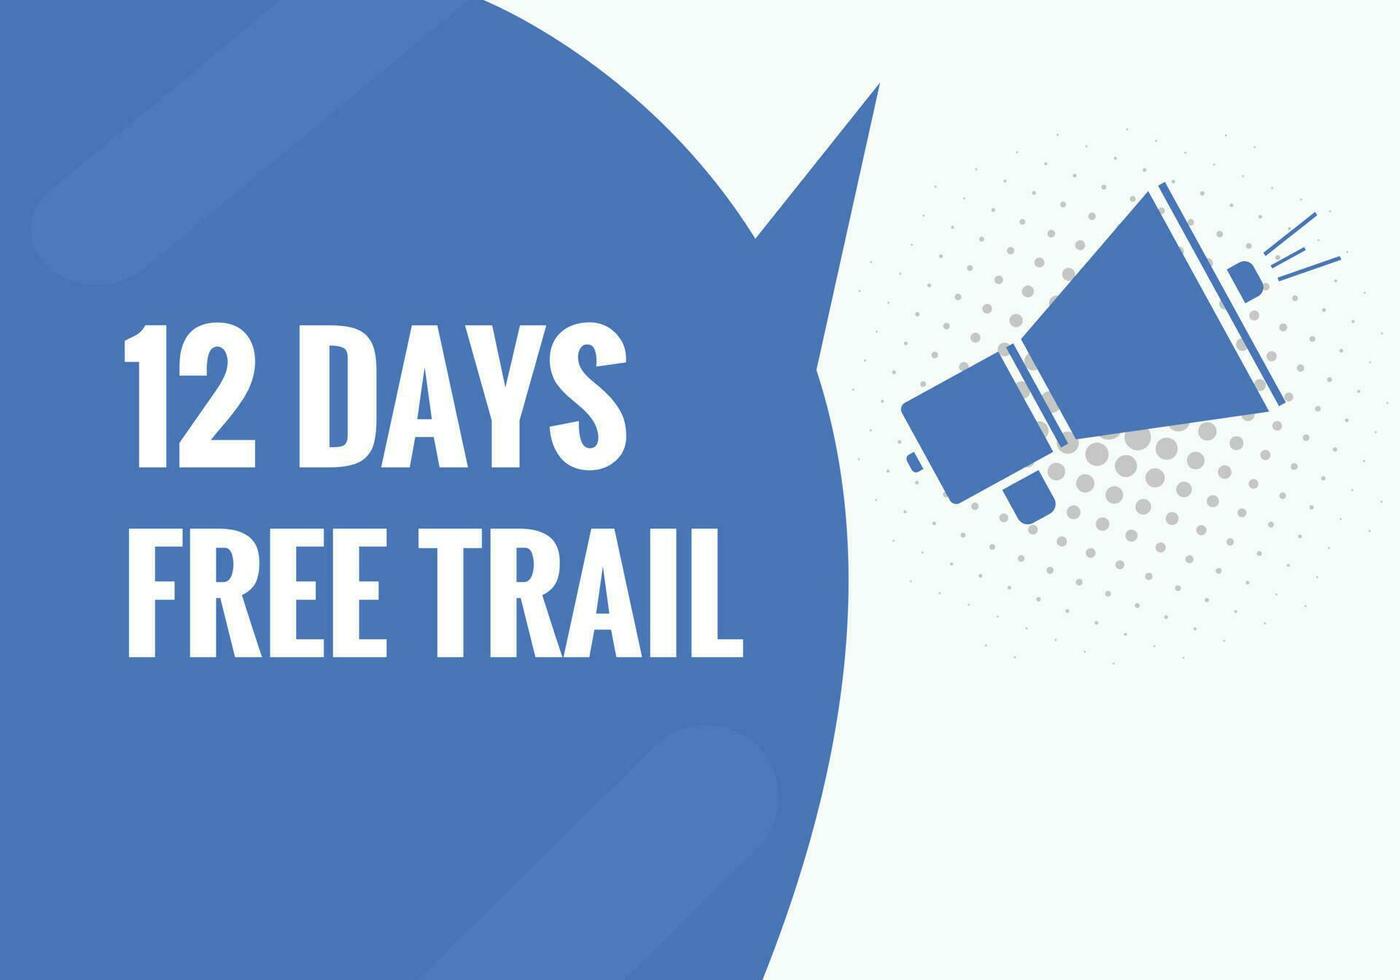 12 days Free trial Banner Design. 12 day free banner background vector